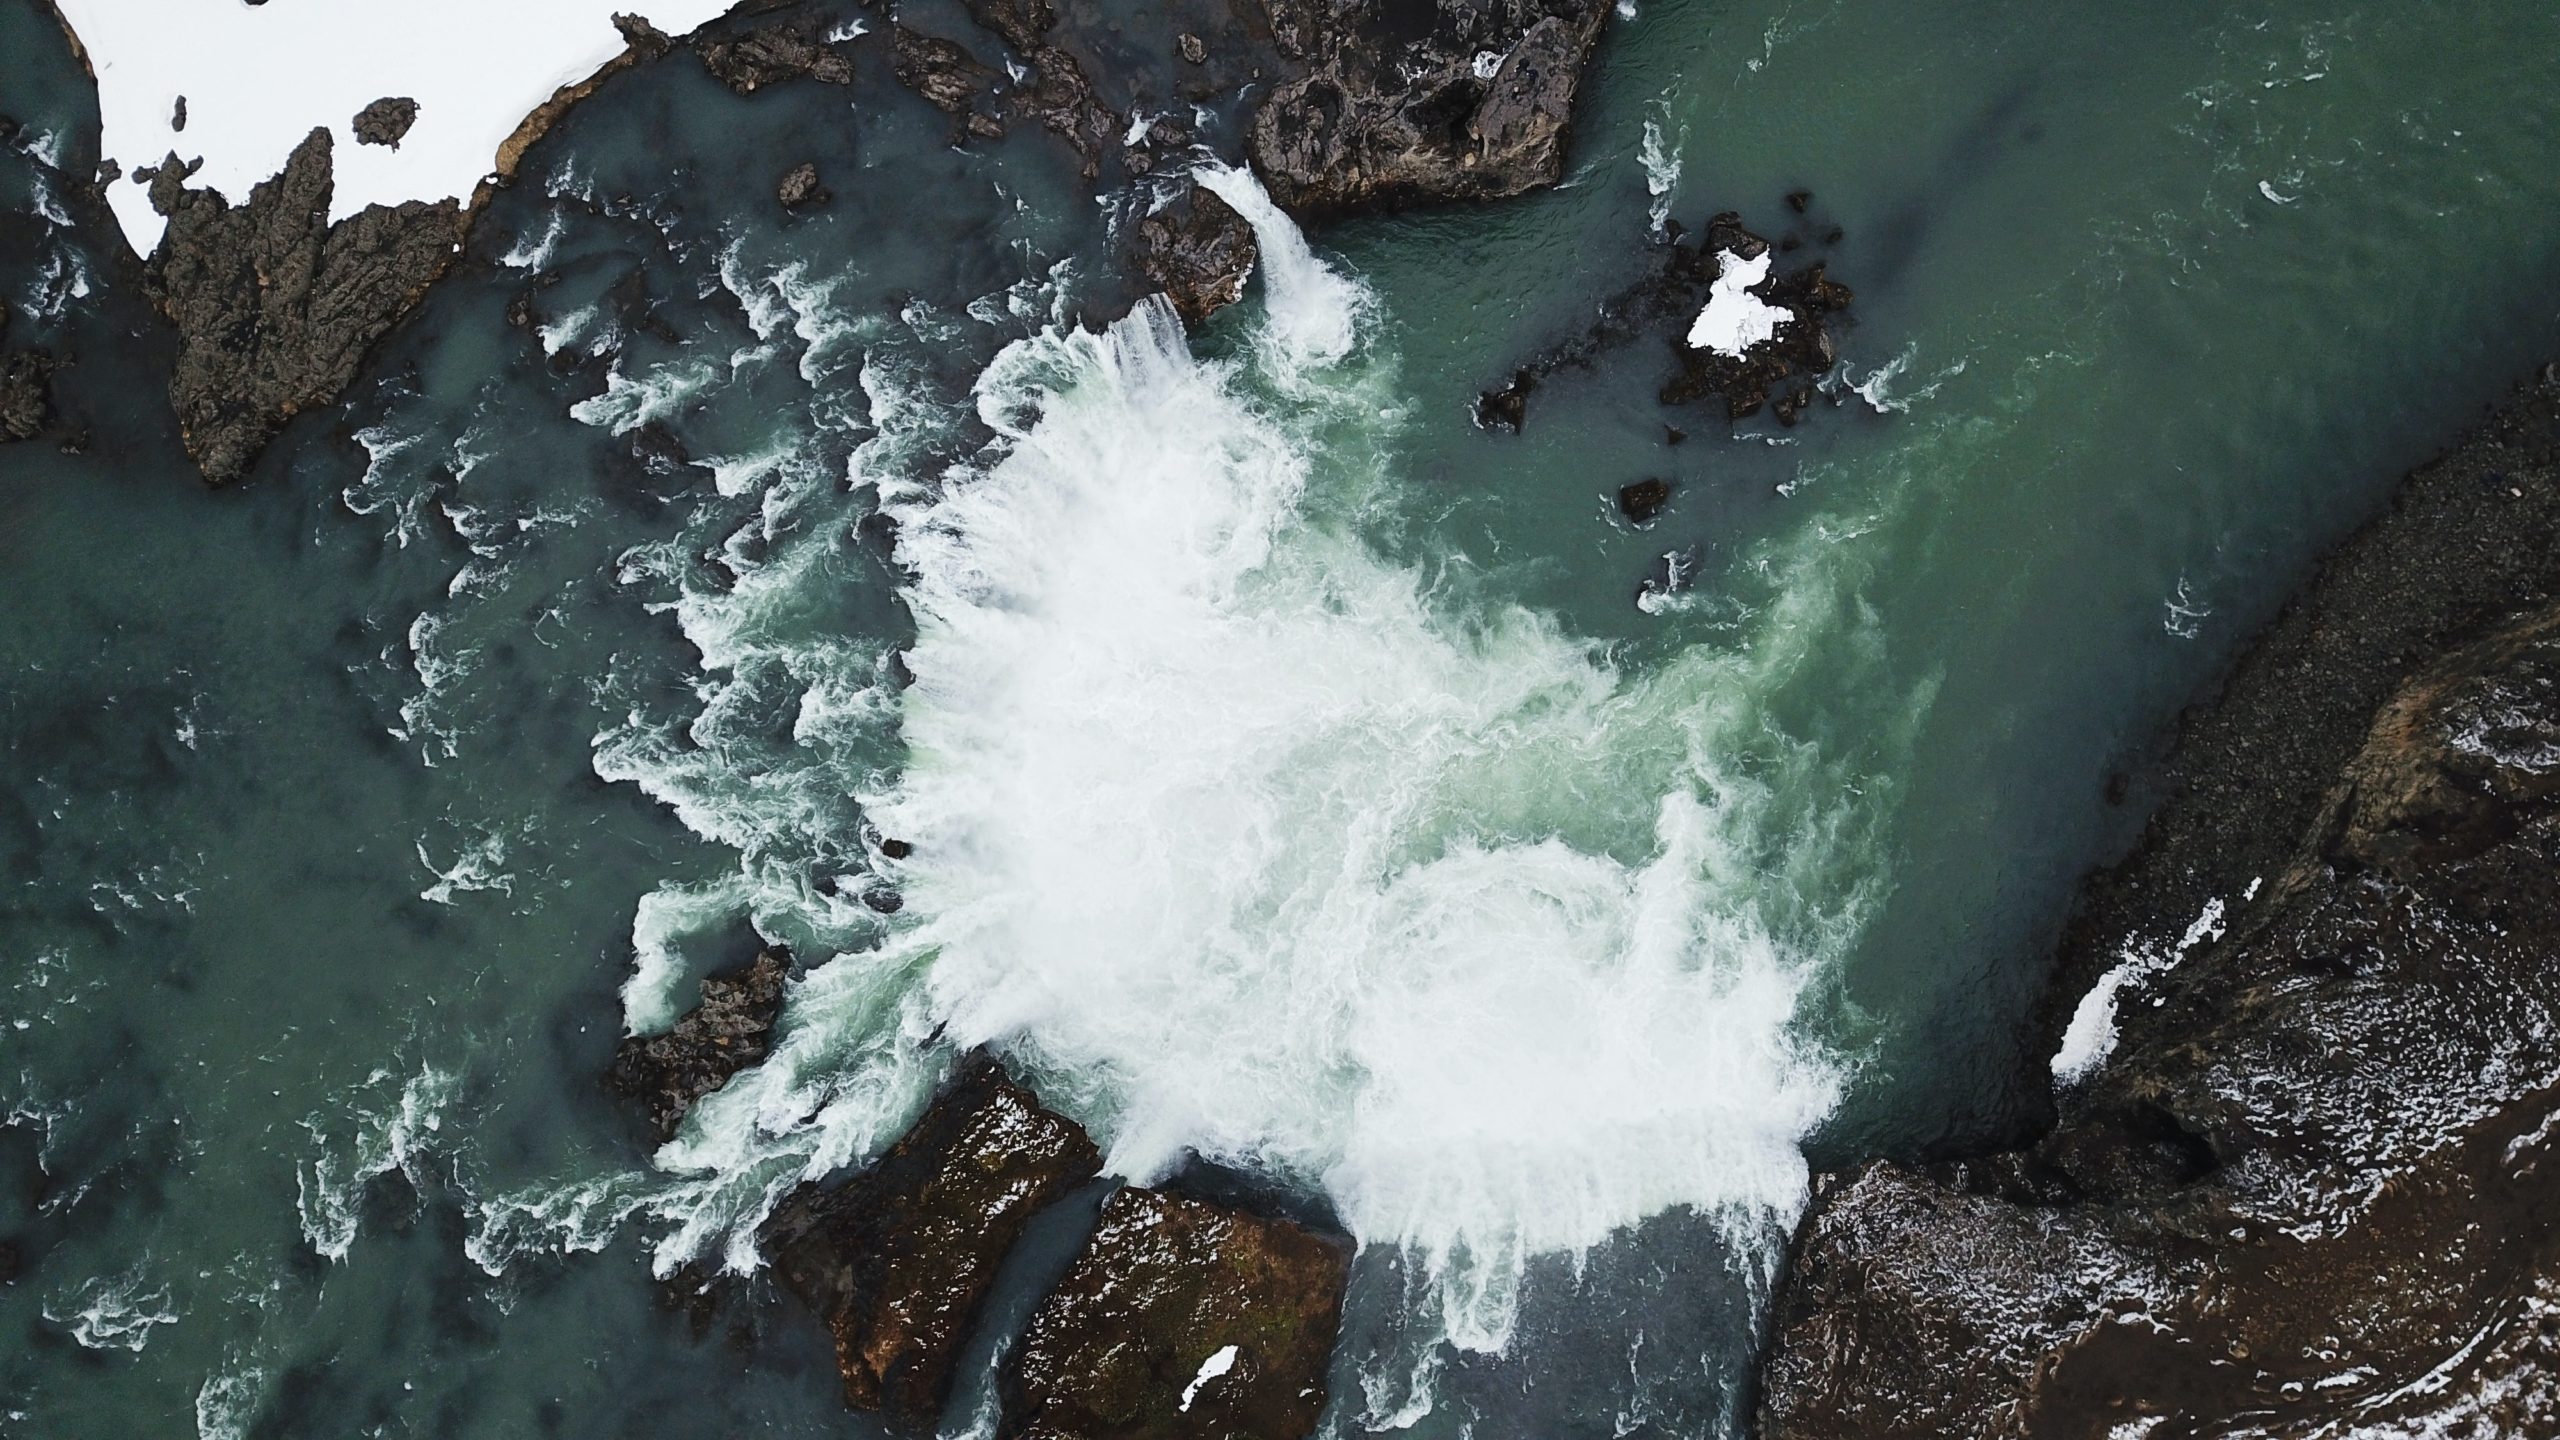 An aerial shot of a waterfall in Iceland